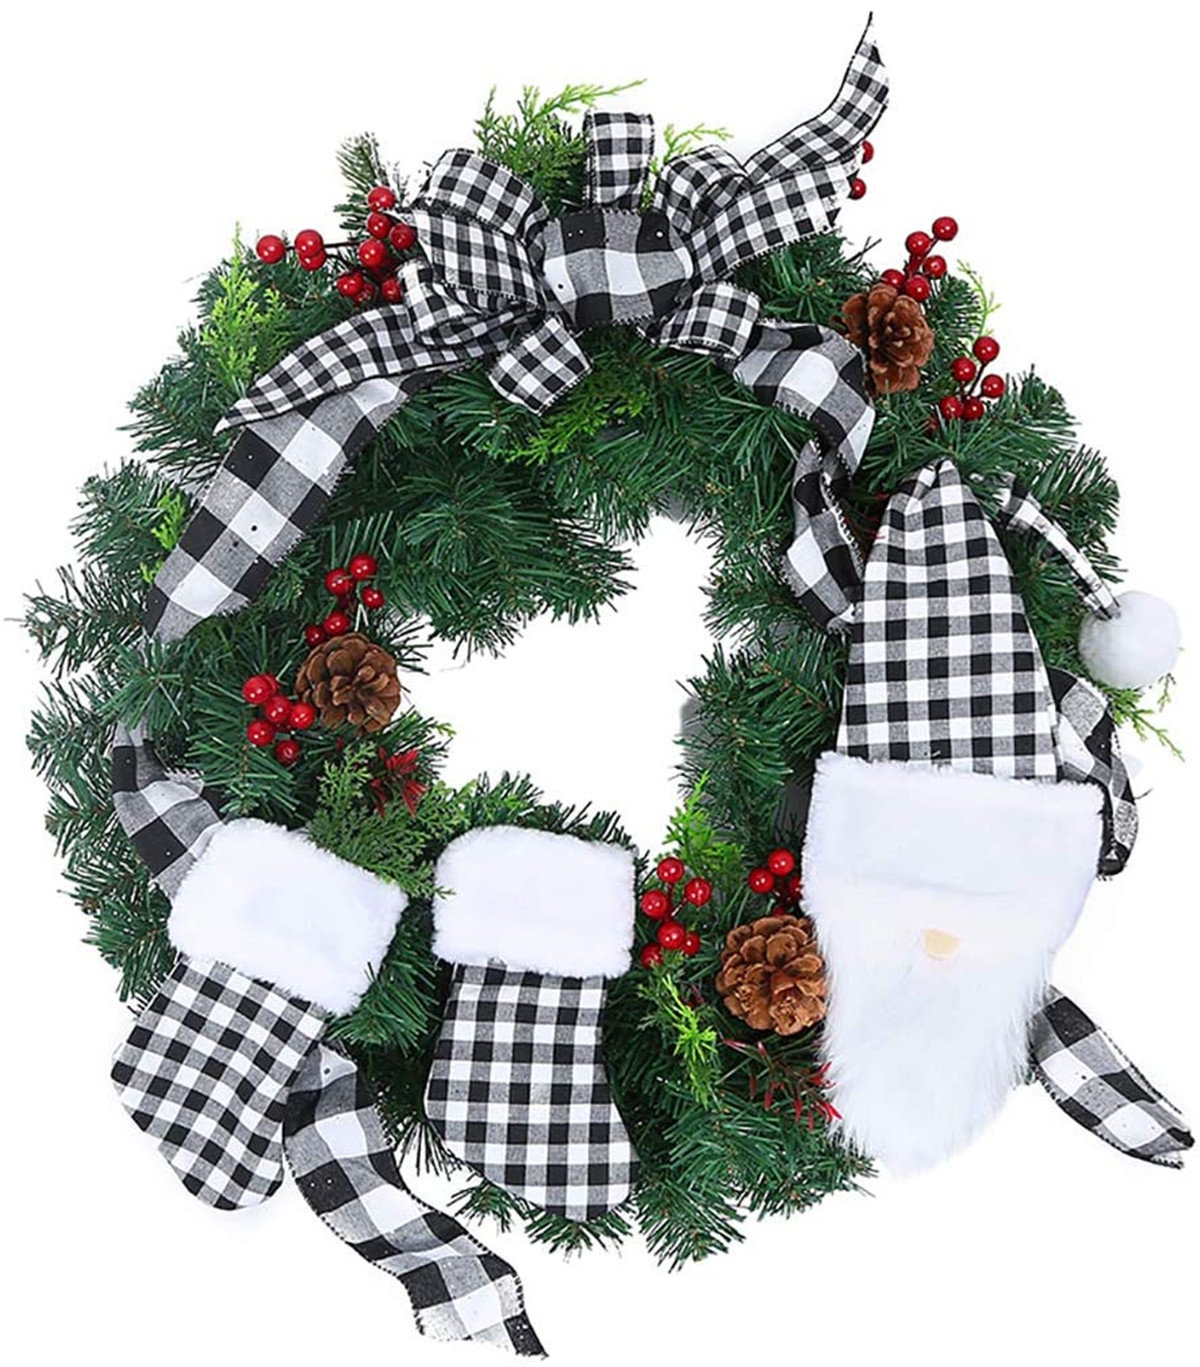 10 Inches Christmas Wreath Red Truck Berry Artificial Pine Wreath Winter Garland for Front Door Shop Fireplaces Walls Windows New Year Decor